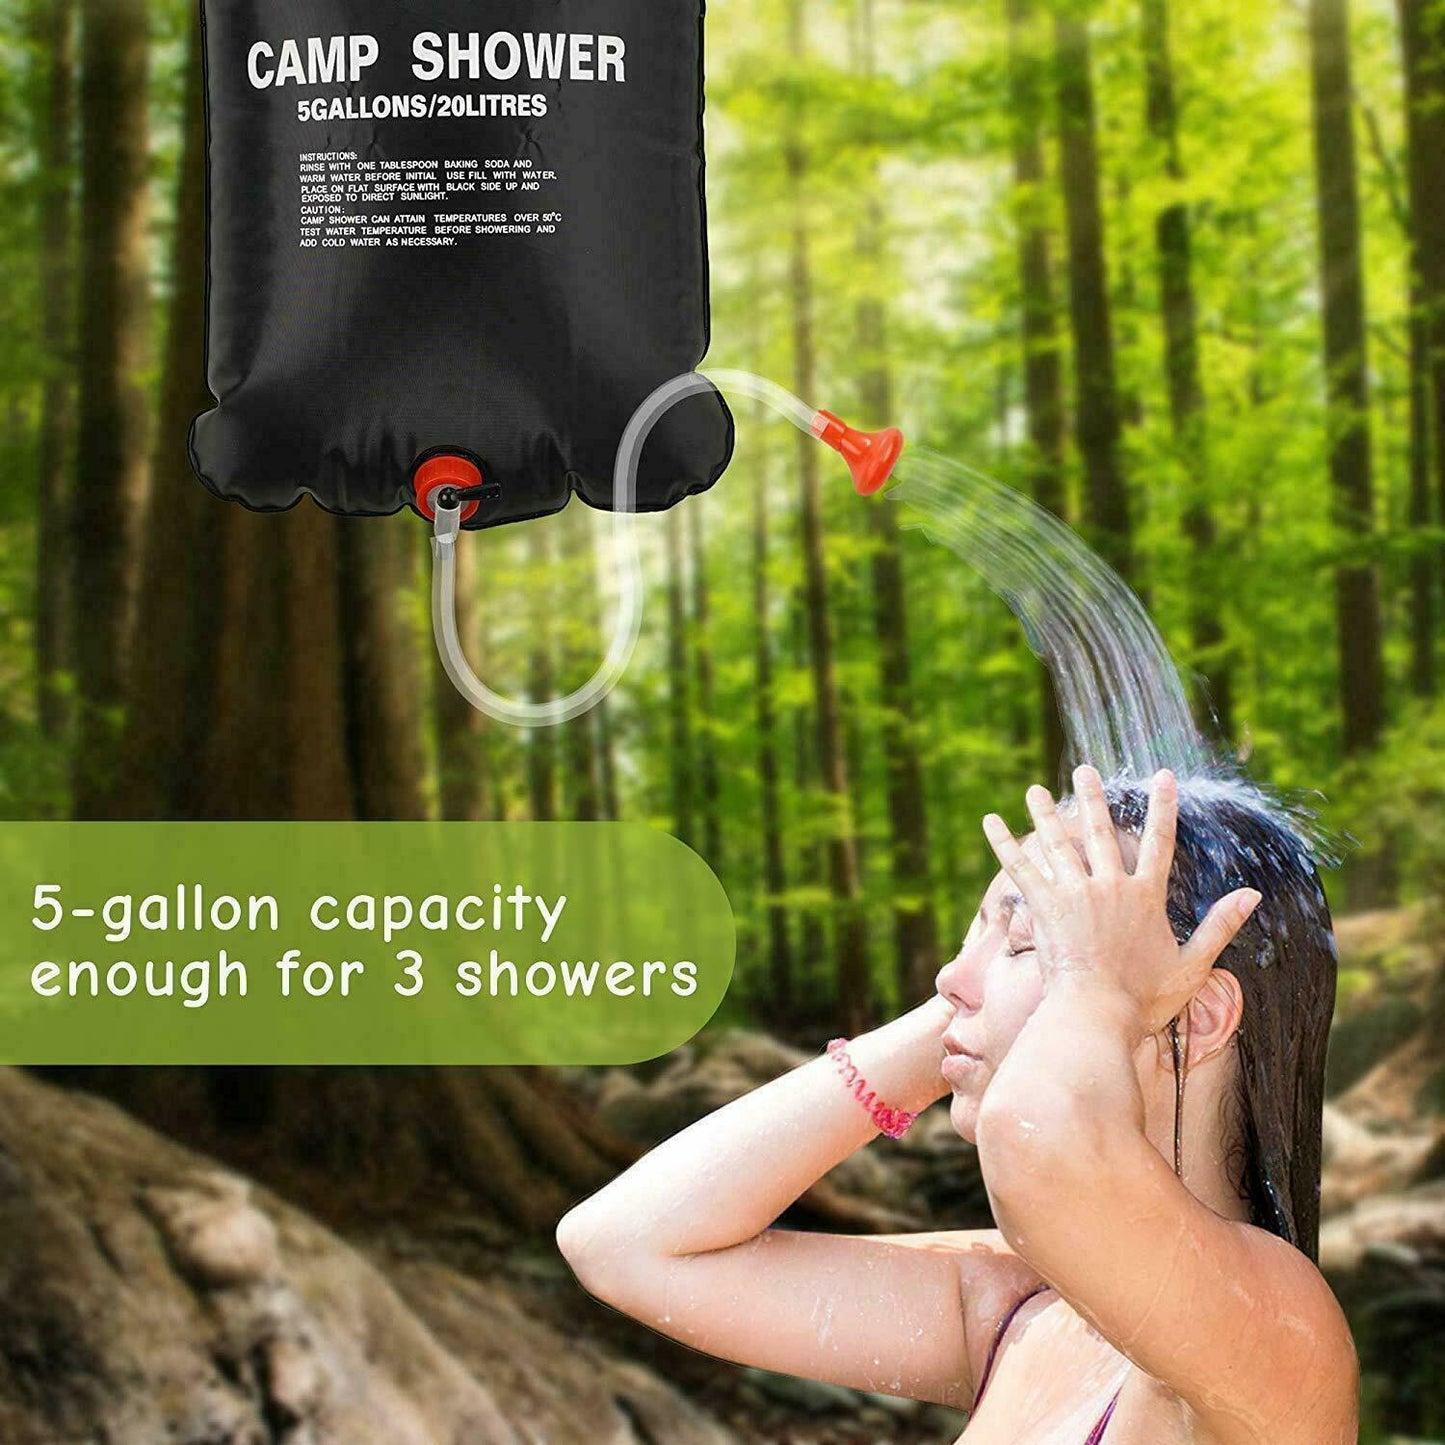  Military Matter 20L Camping Shower Portable Compact Solar Sun Heating Bath Bag Outdoor Travel | The Best CS Tactical Clothing Store